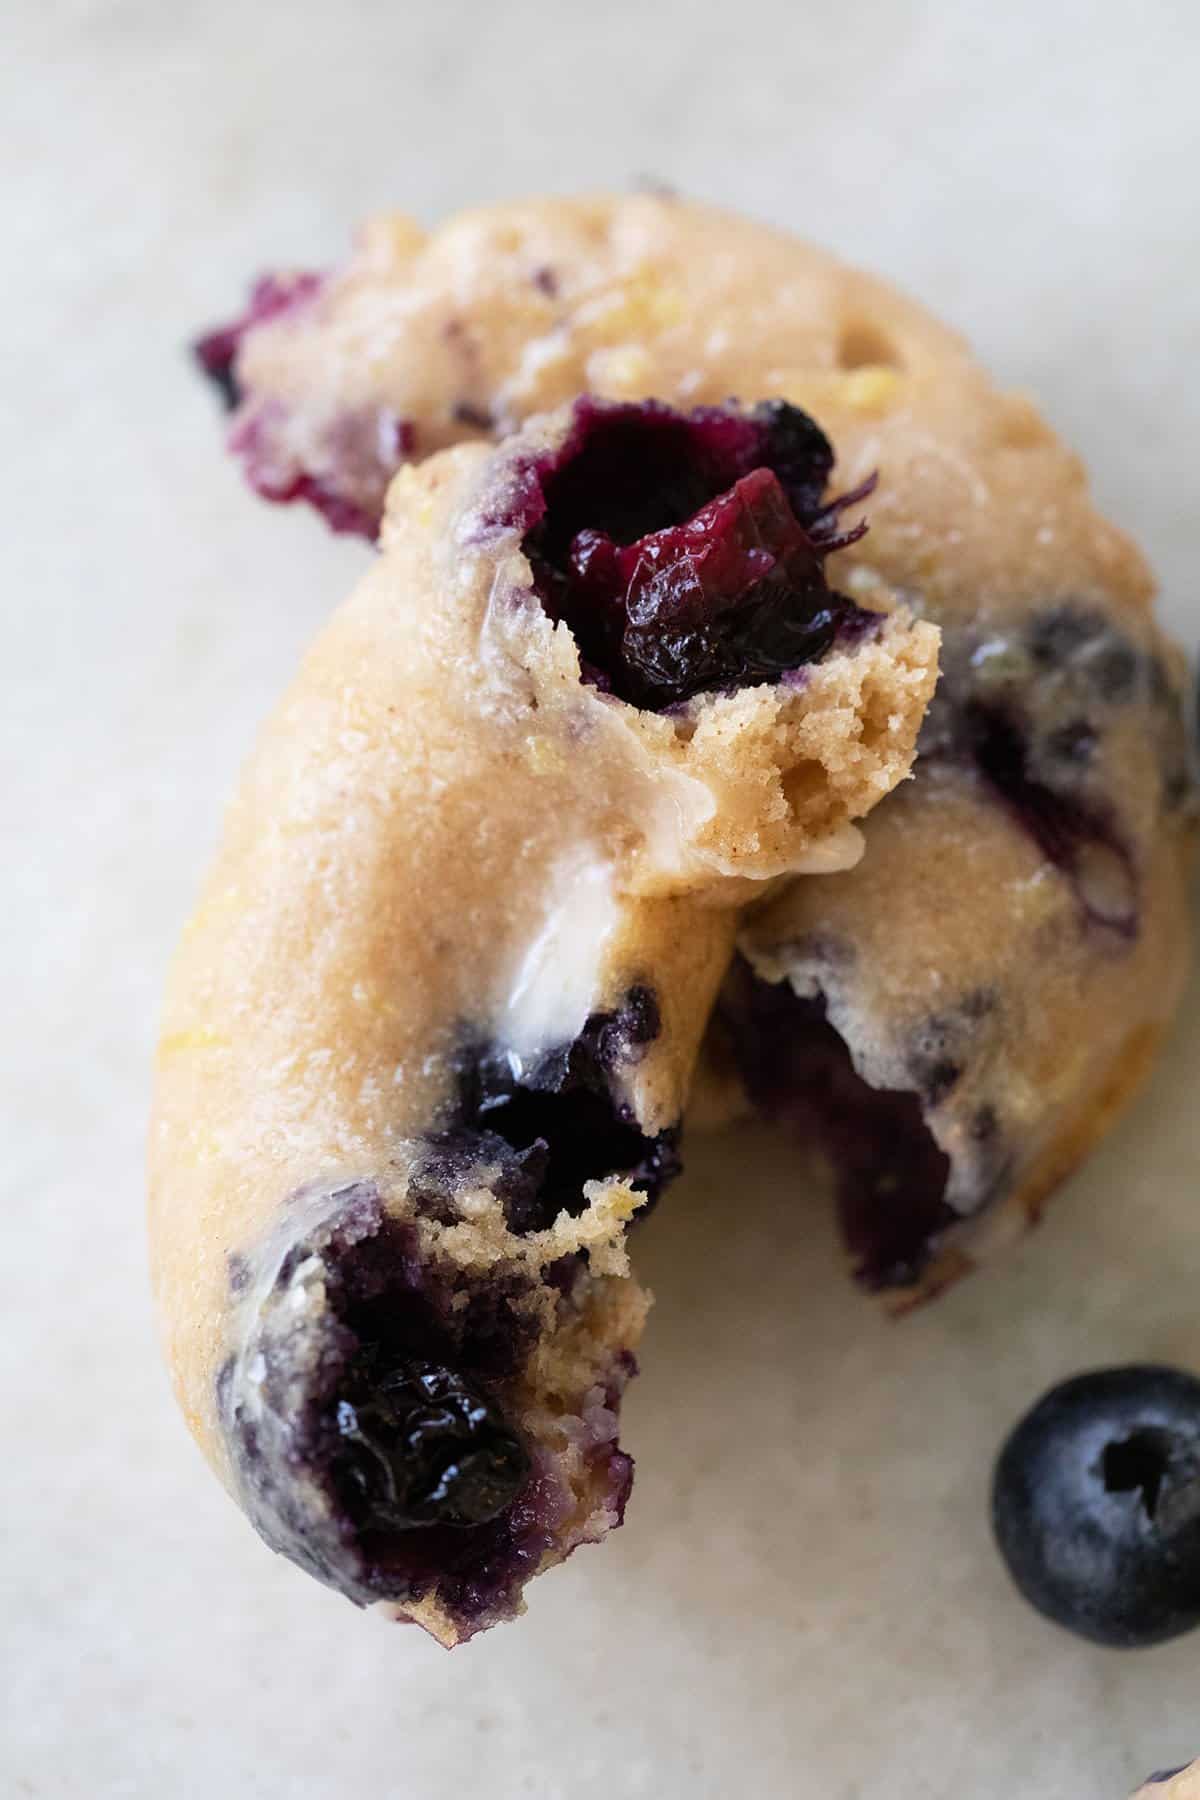 baked blueberry donut cut in half